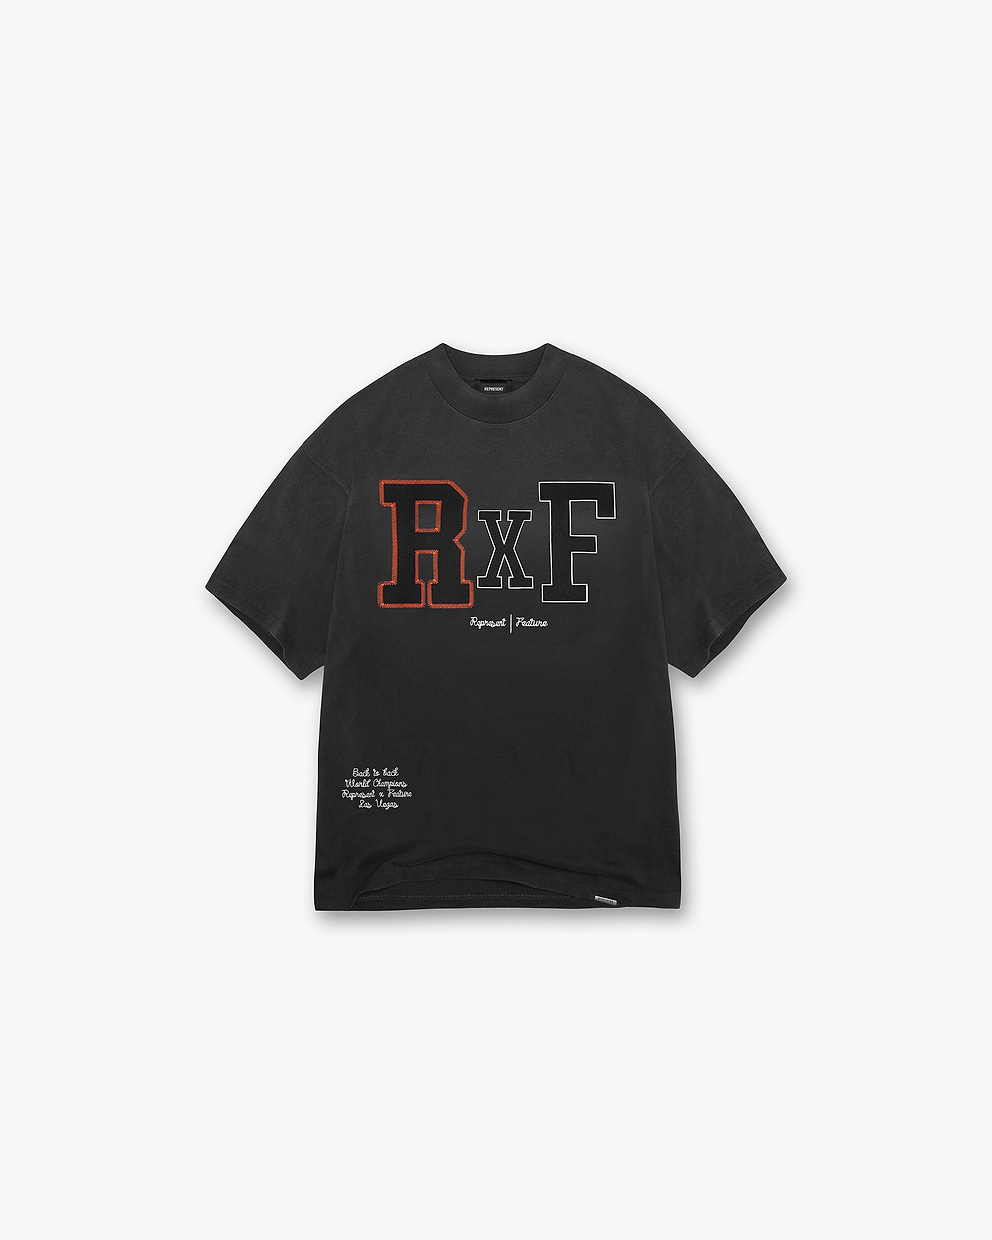 Represent X Feature Champions T-Shirt - Stained Black